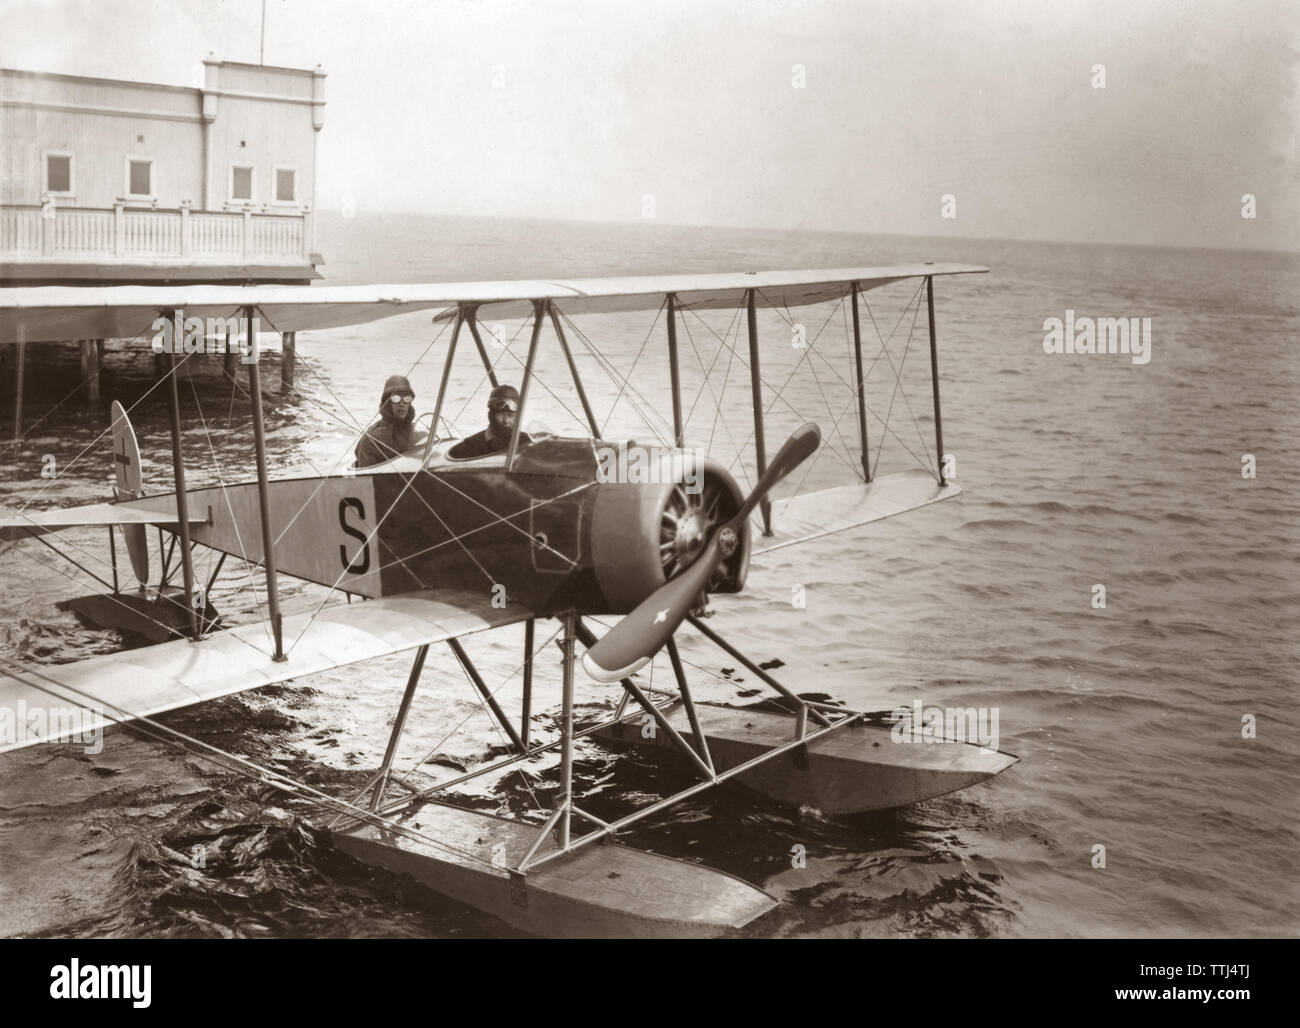 Seaplane 1919. On April 11 1919 was the first flight of the route Malmö Sweden - Copenhagen Denmark. The pilot Axel Lind made the flight in 27 minutes. The plane from Enoch Thulins aircraft factory. Stock Photo